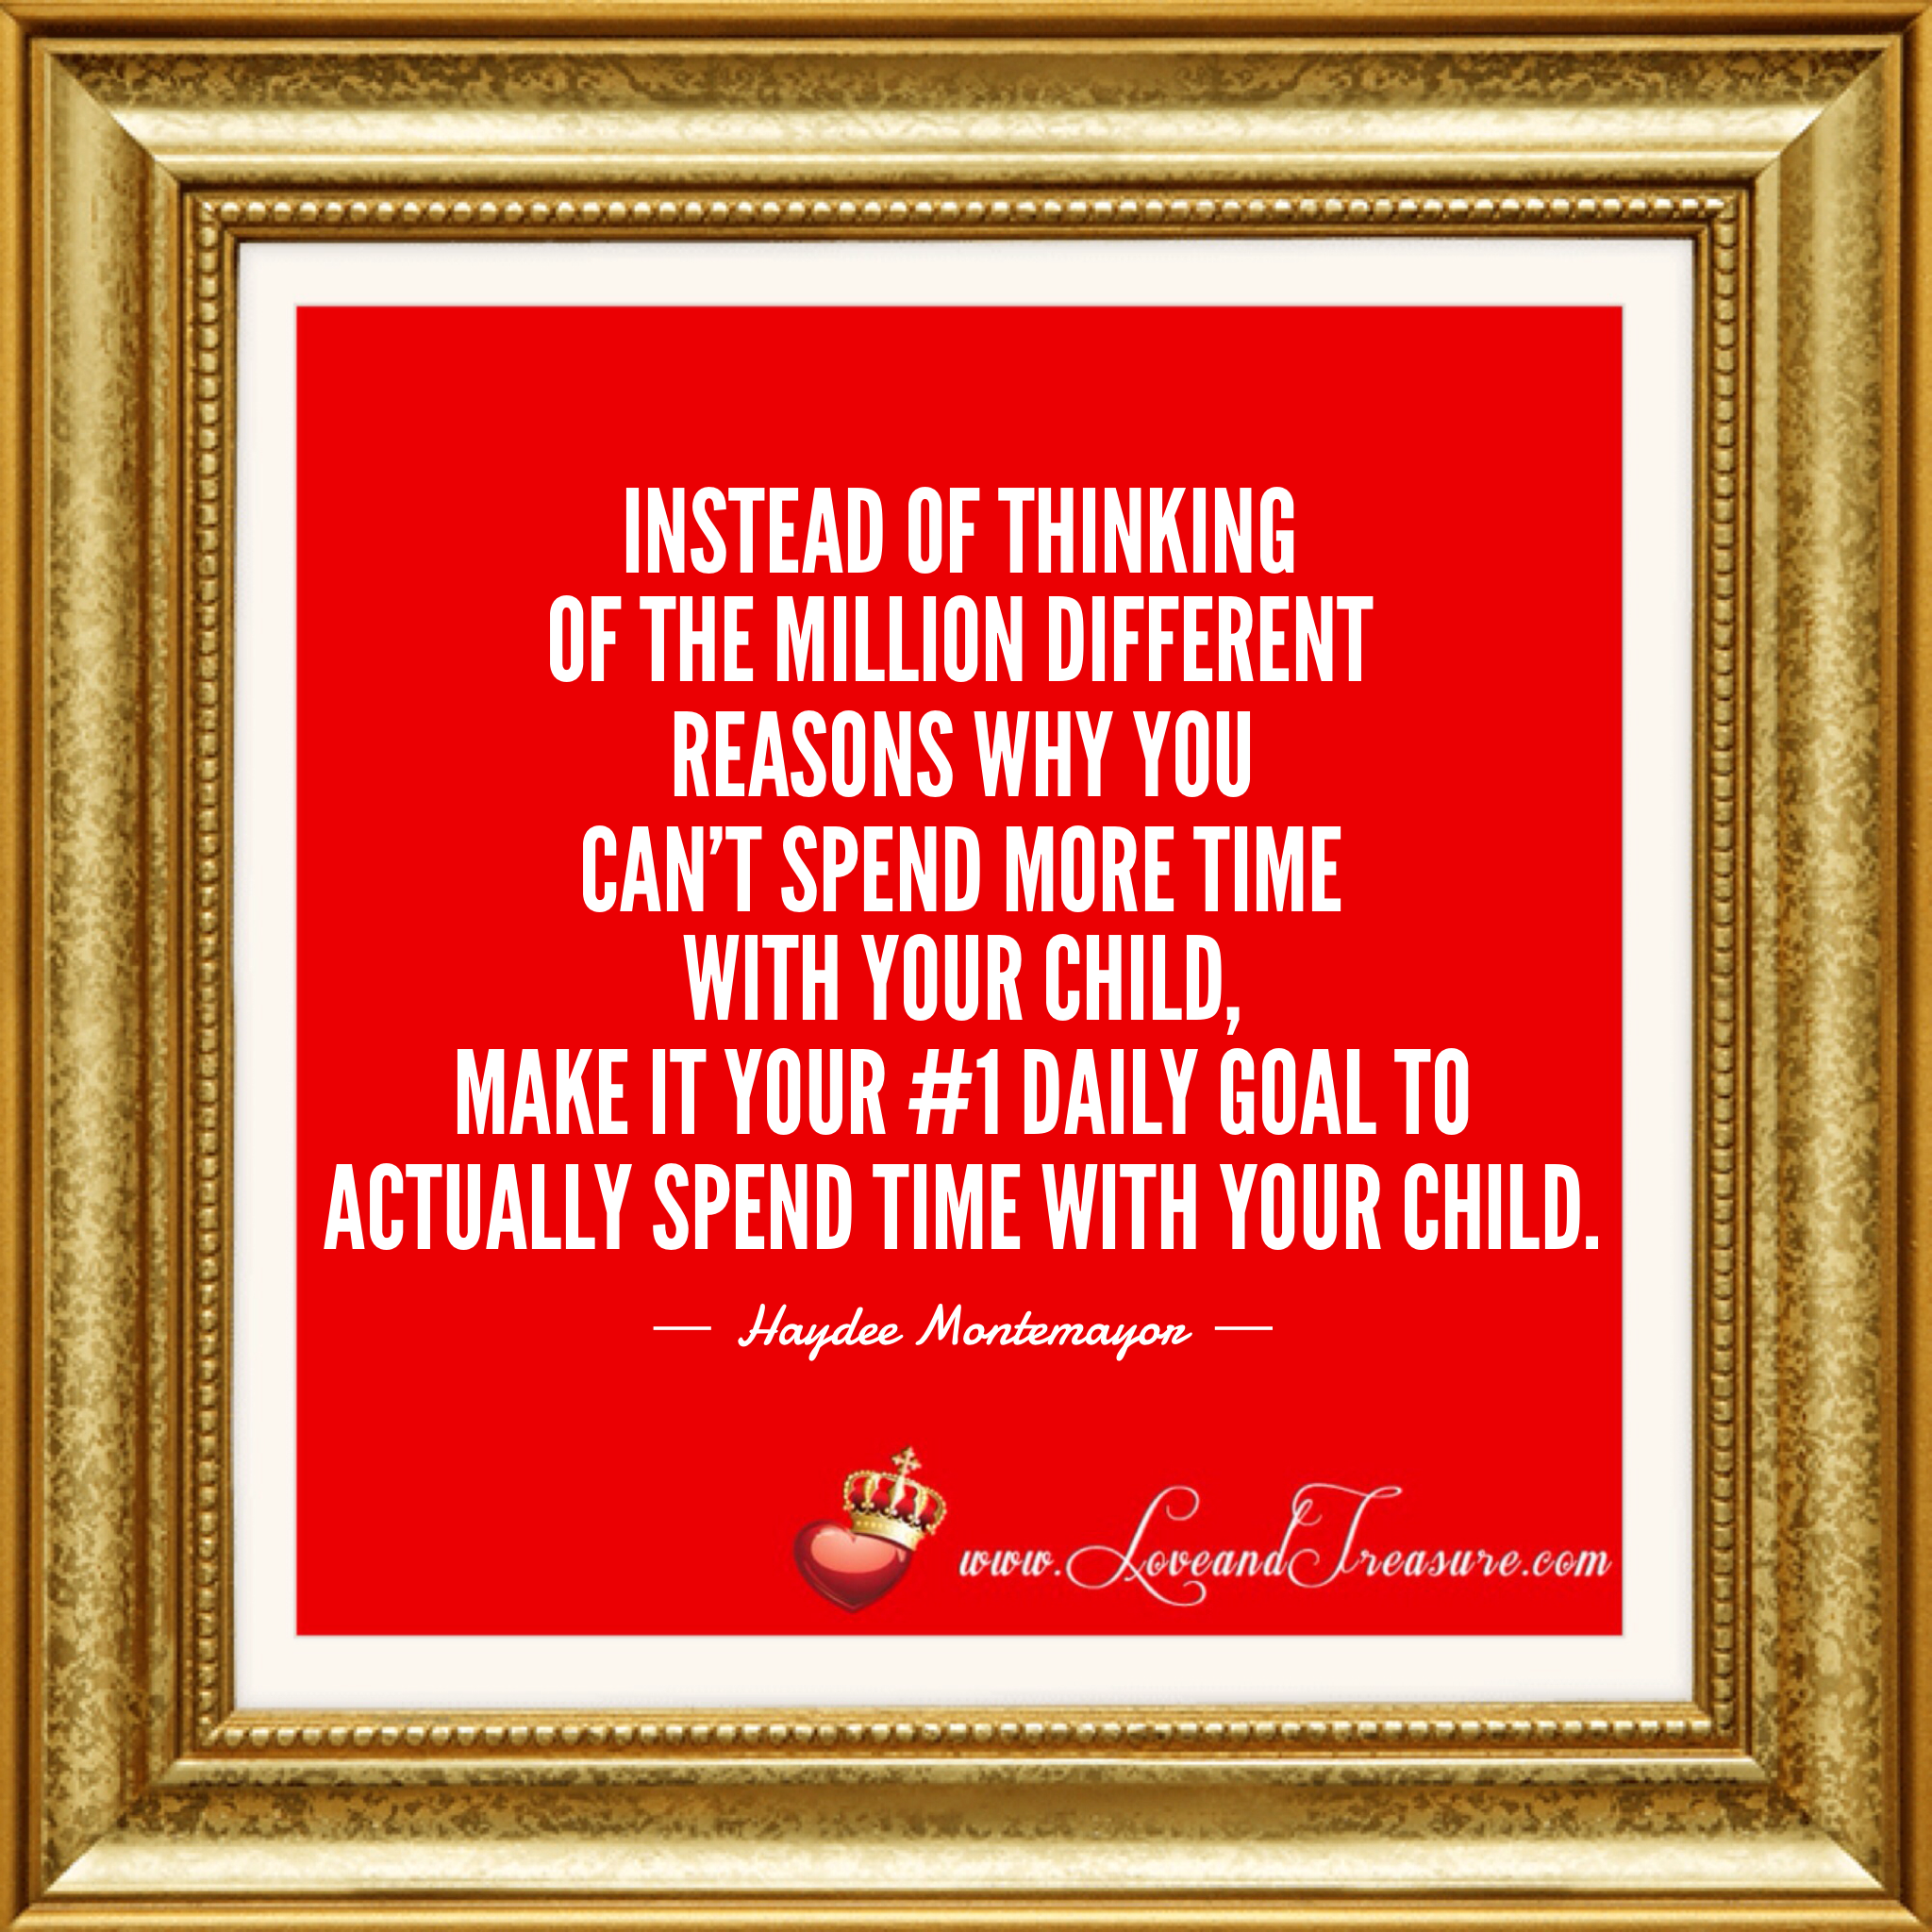 "Instead of thinking of the million different reasons why you can't spend more time with your child, make it your #1 daily goal to actually spend time with your child." - Haydee Montemayor from Love and Treasure blog www.loveandtreasure.com